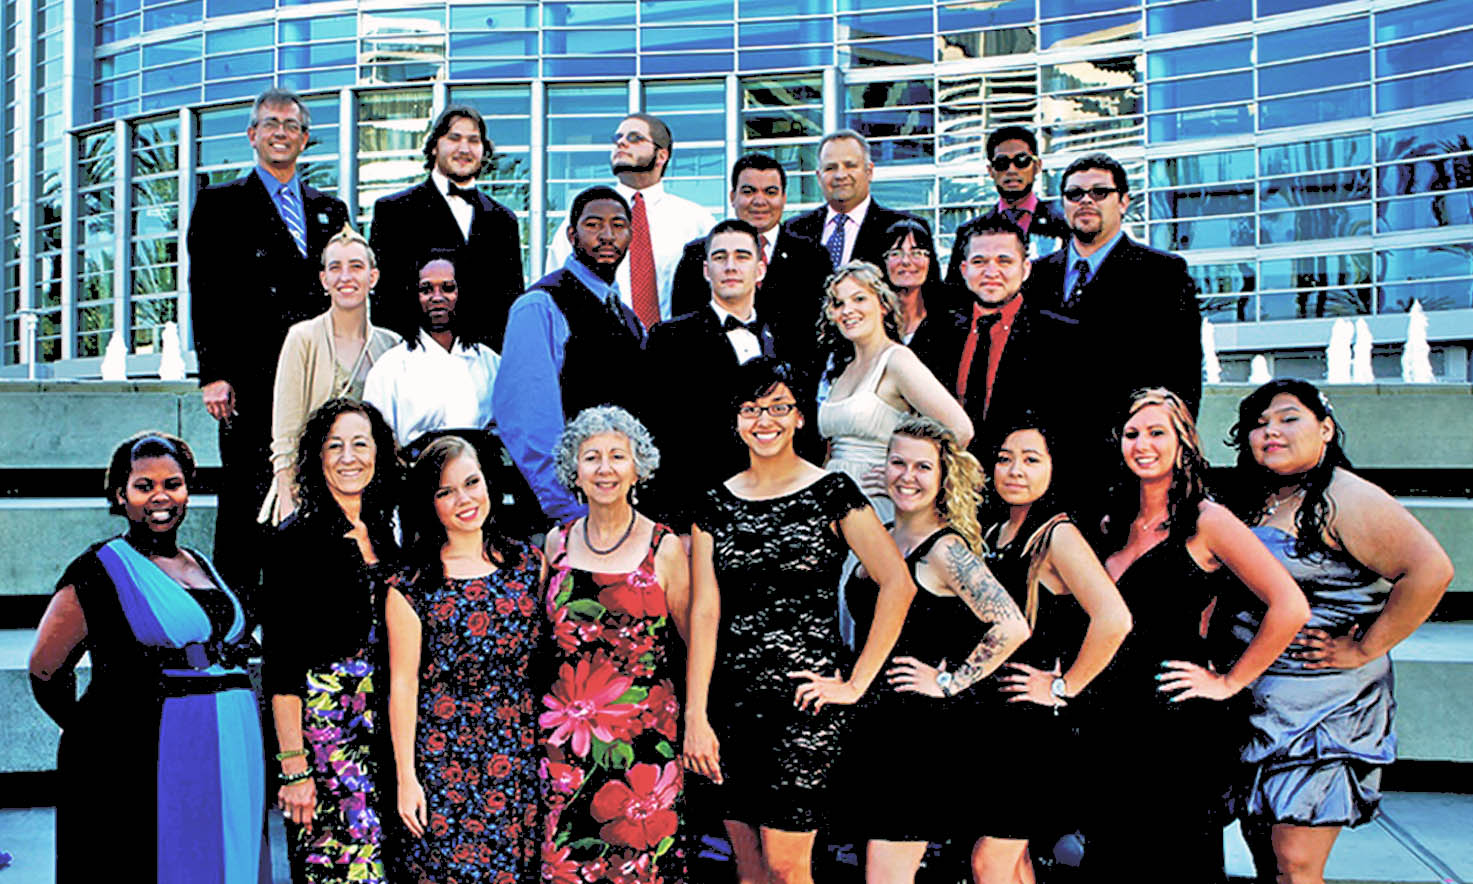 Read the full story, CCCC Phi Beta Lambda among the best at nationals